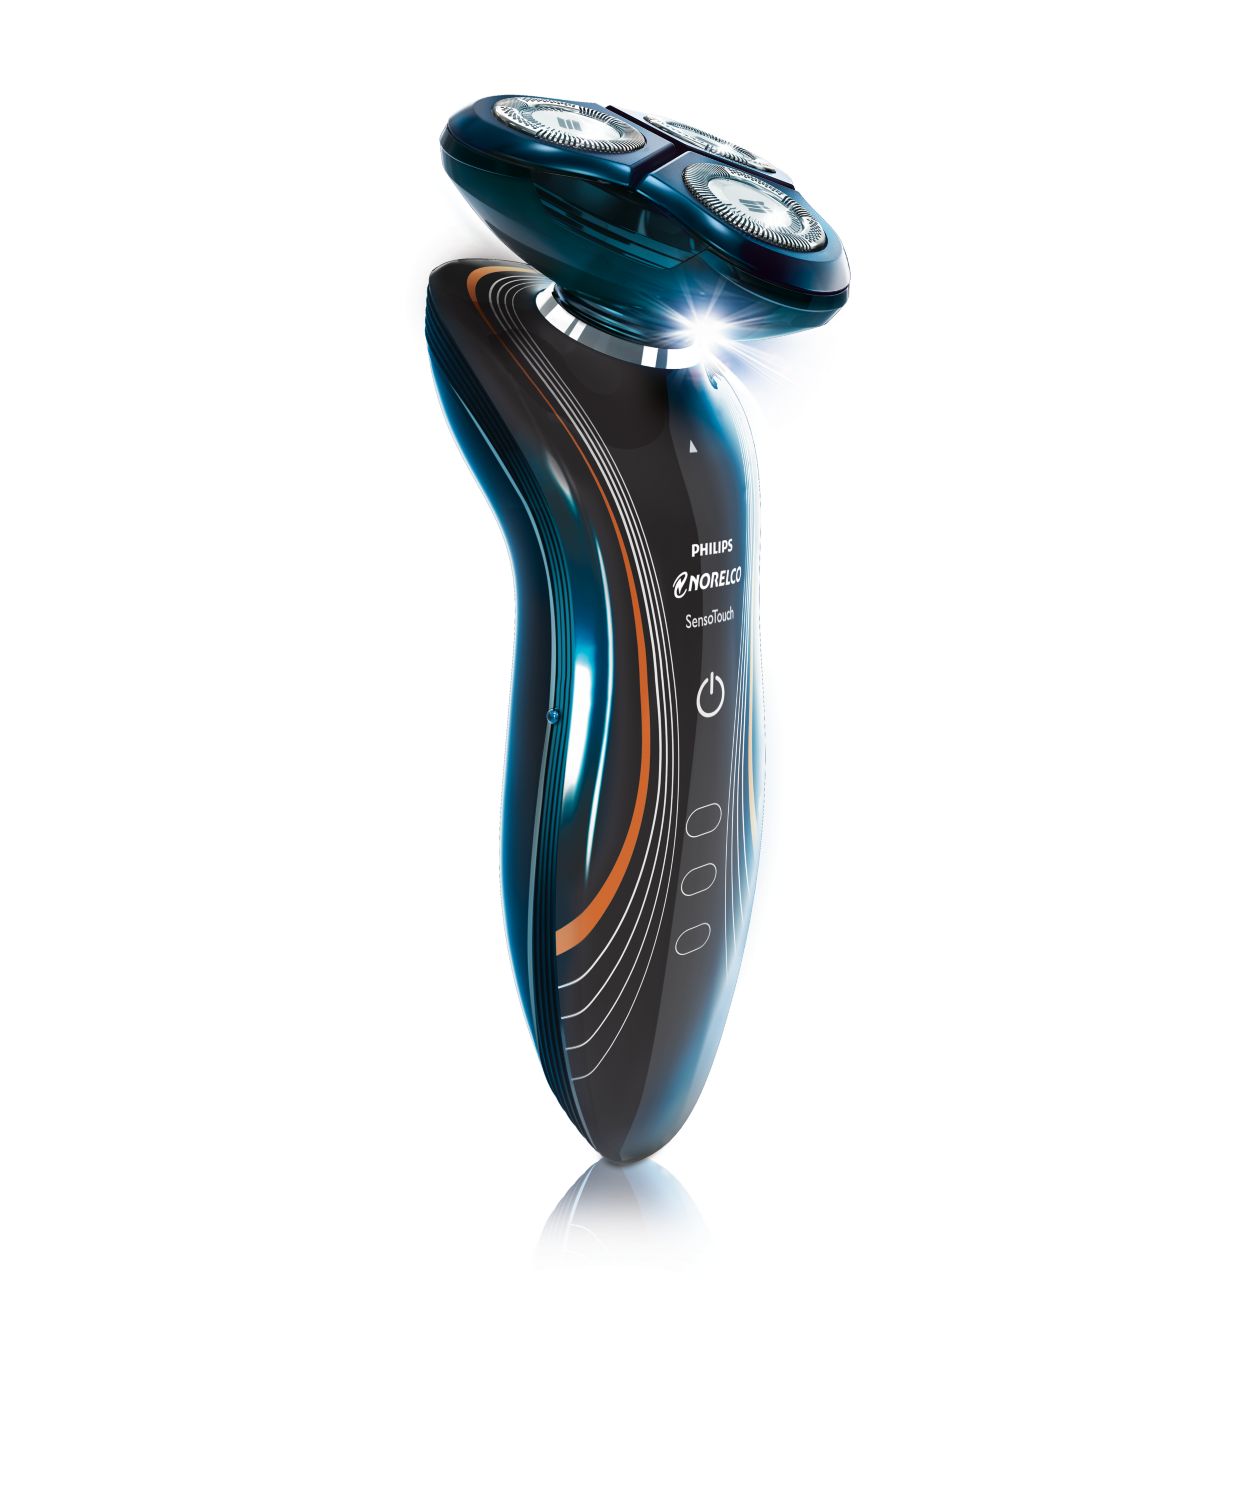 Philips Norelco Shaver 4500 (Model AT830/46) Frustration Free Packagin